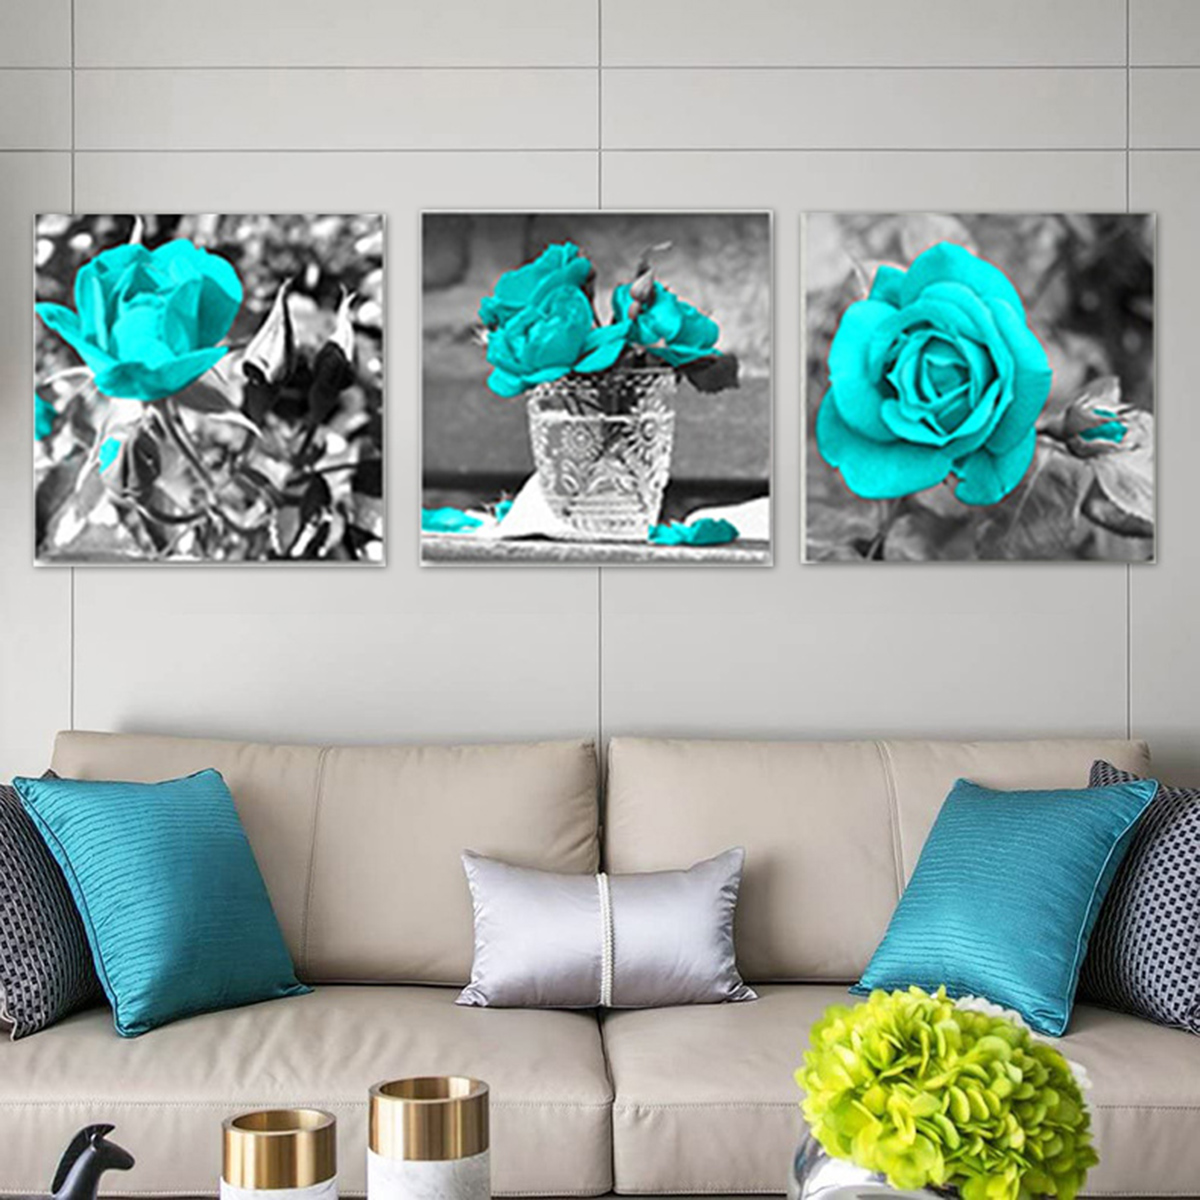 Blue-Rose-Canvas-Painting-Wall-Decorative-Print-Art-Pictures-Unframed-Wall-Hanging-Home-Office-Wall--1778176-4